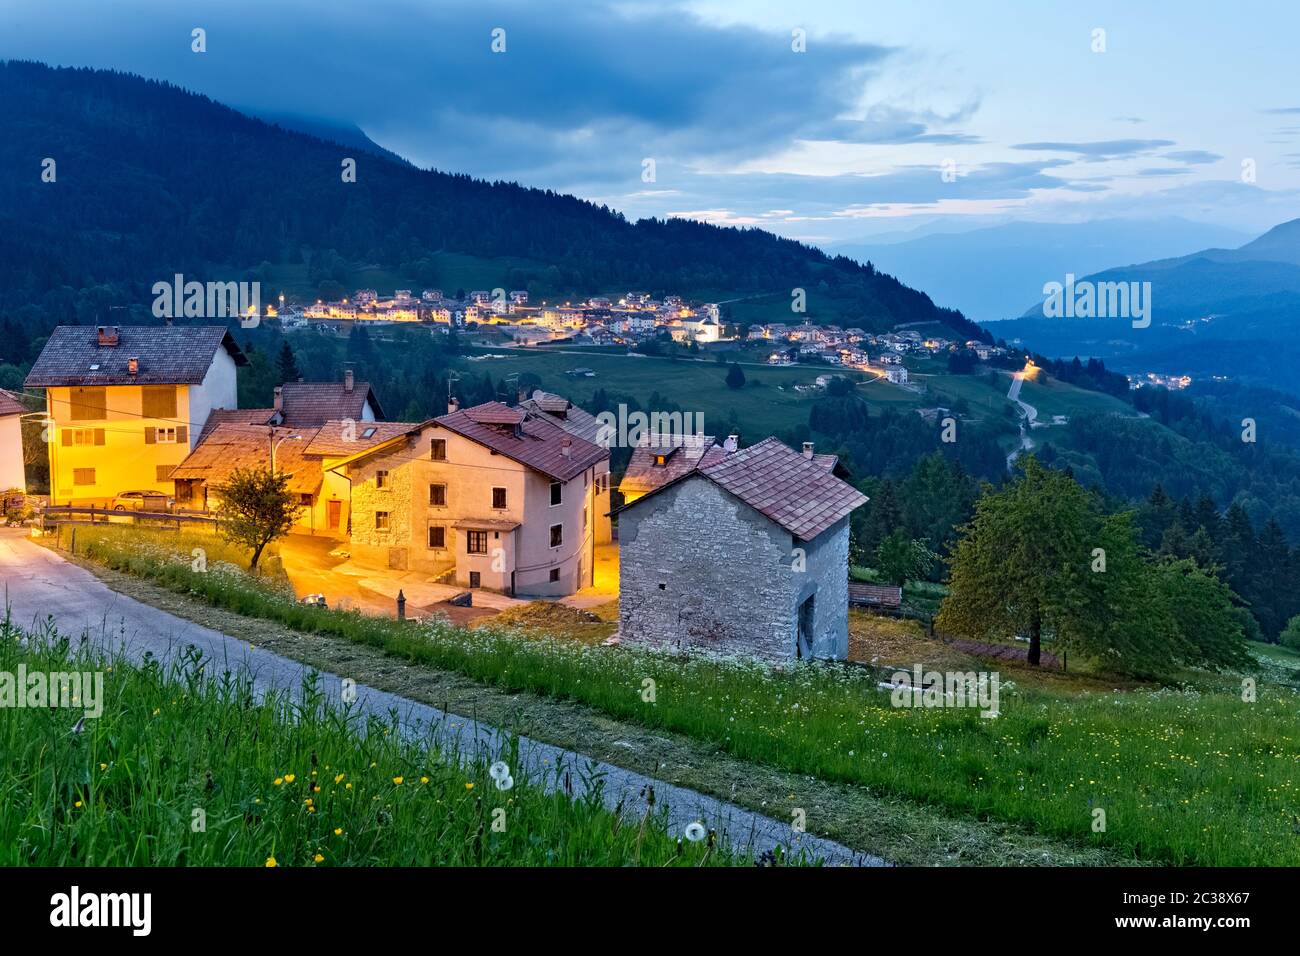 Night falls at the village of Perpruneri on the Alpe Cimbra. In the background the village of San Sebastiano. Folgaria, Trentino, Italy. Stock Photo